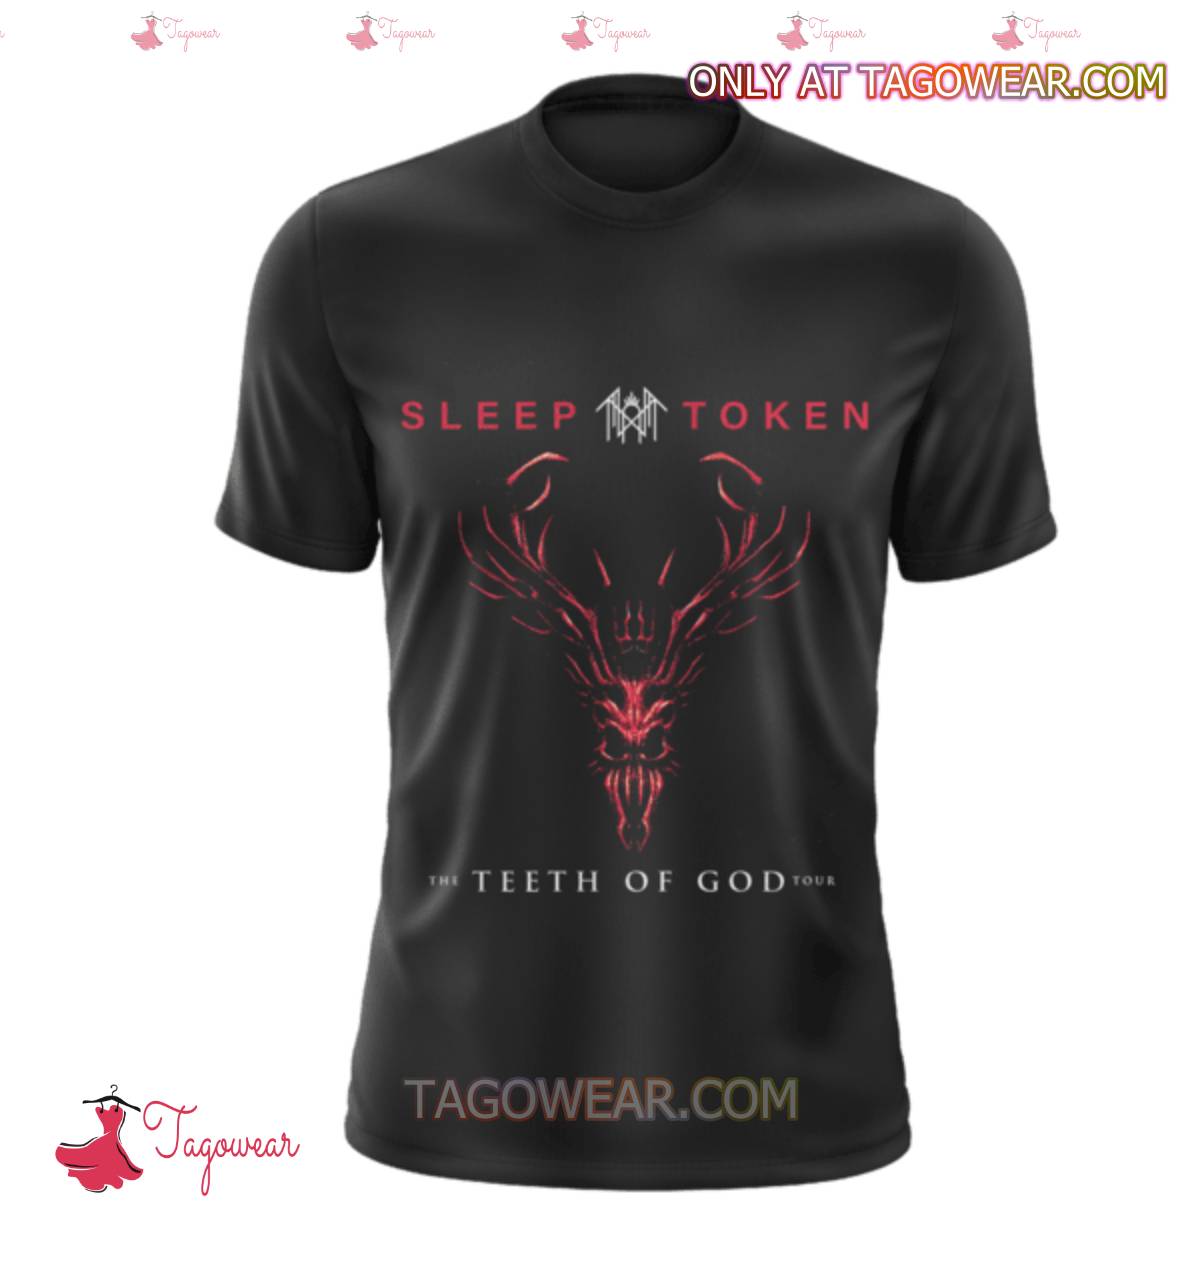 Sleep Token The Teeth Of God Tour You Make Me Wish I Could Disappear T-shirt, Hoodie a